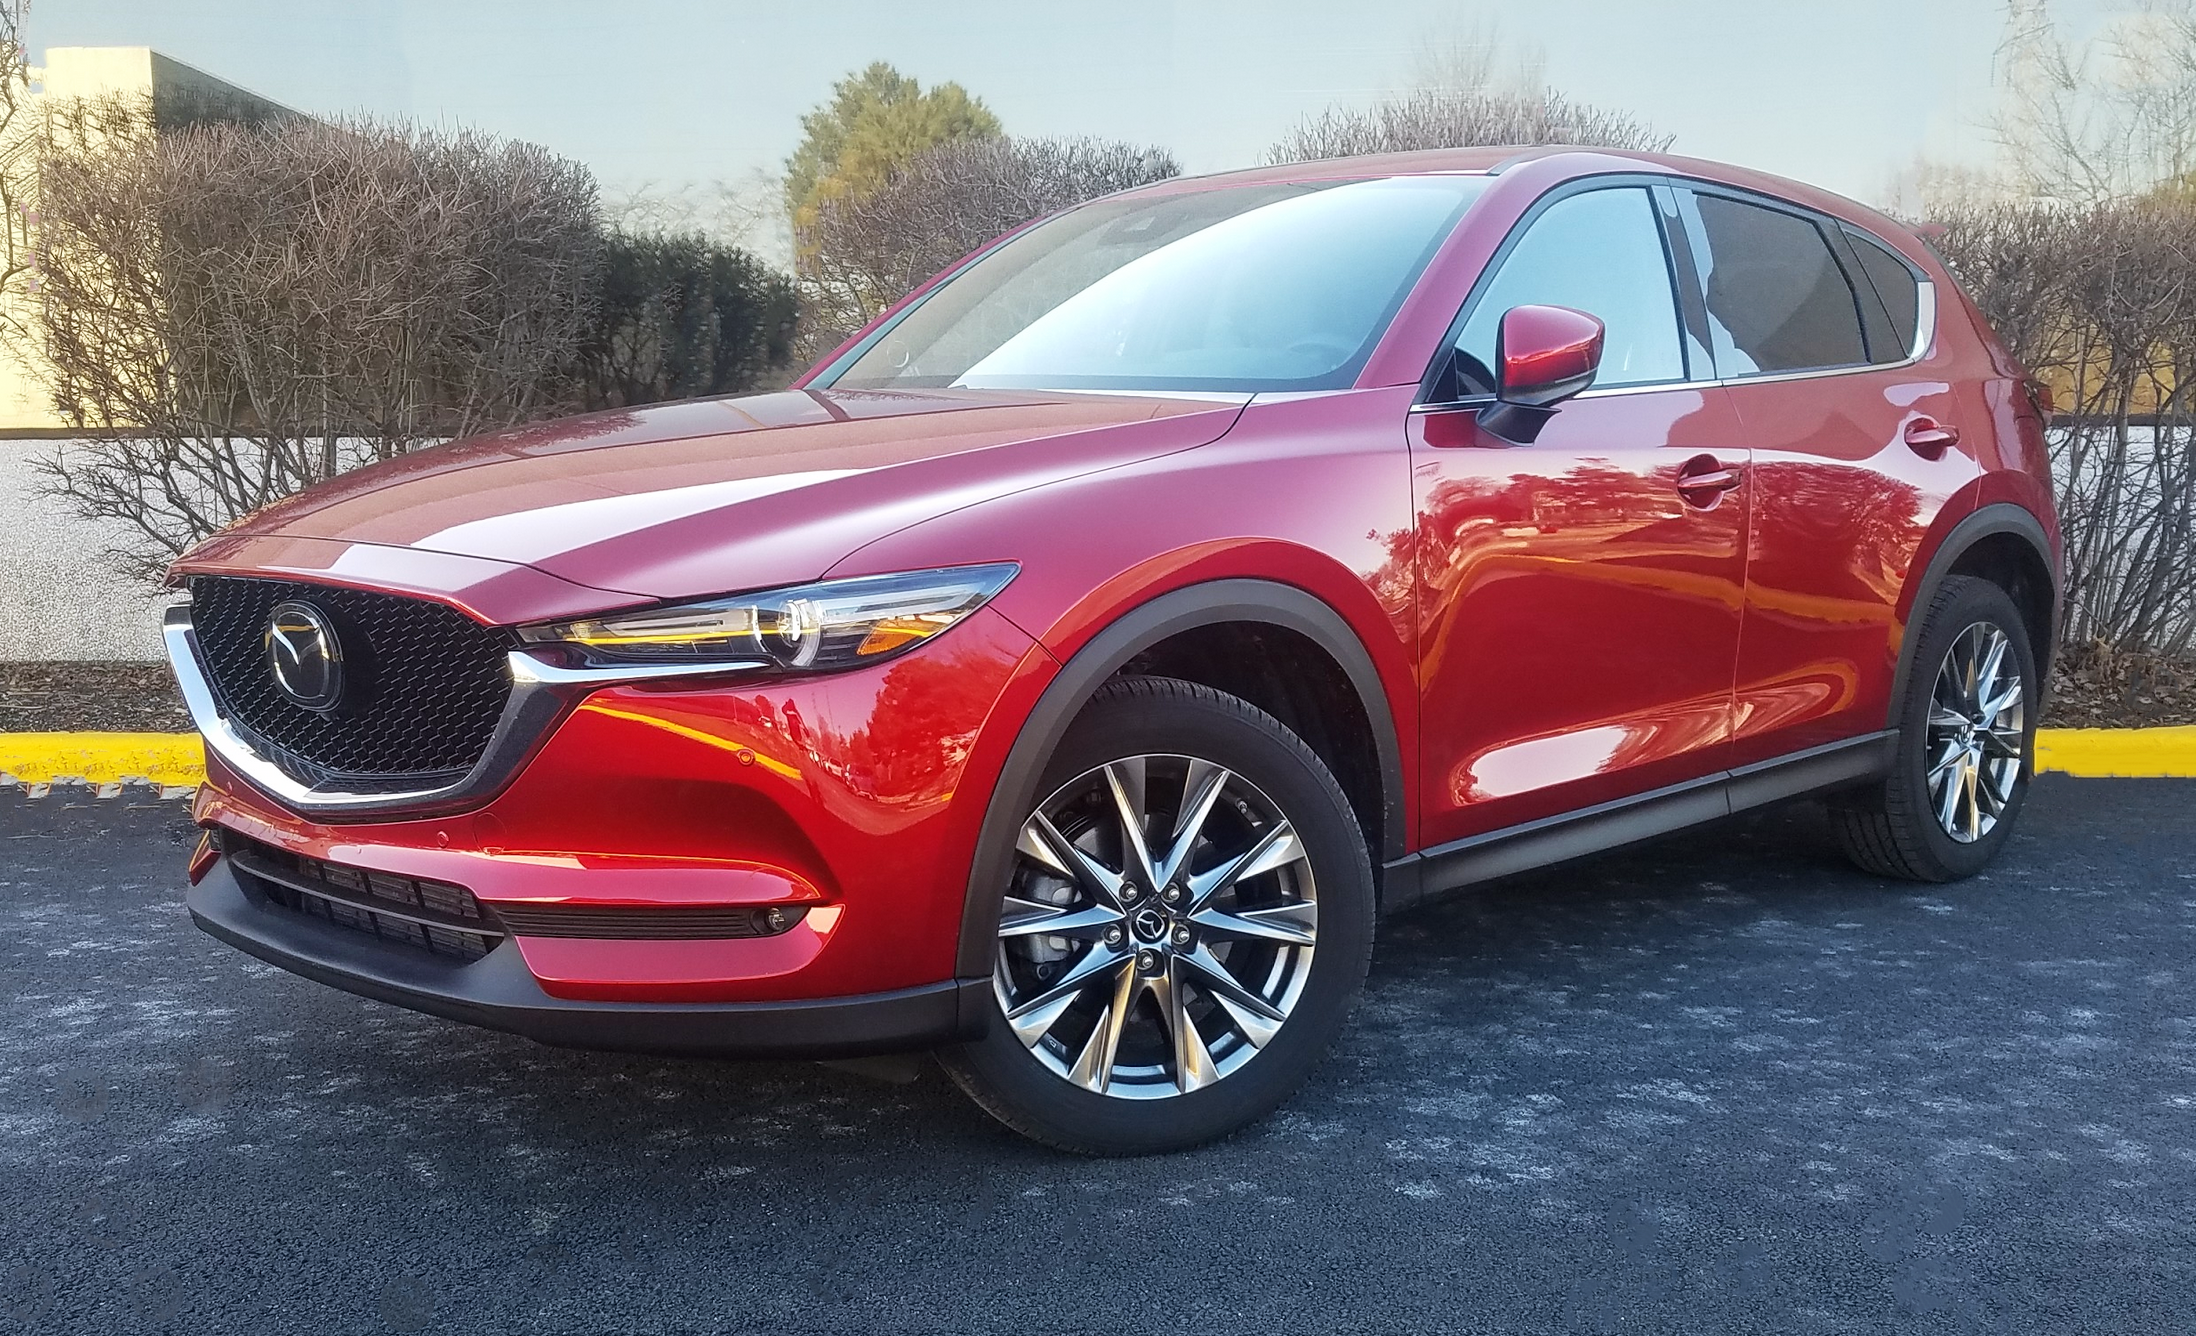 2019 Mazda CX-5 Diesel SUV Review - First USA Test